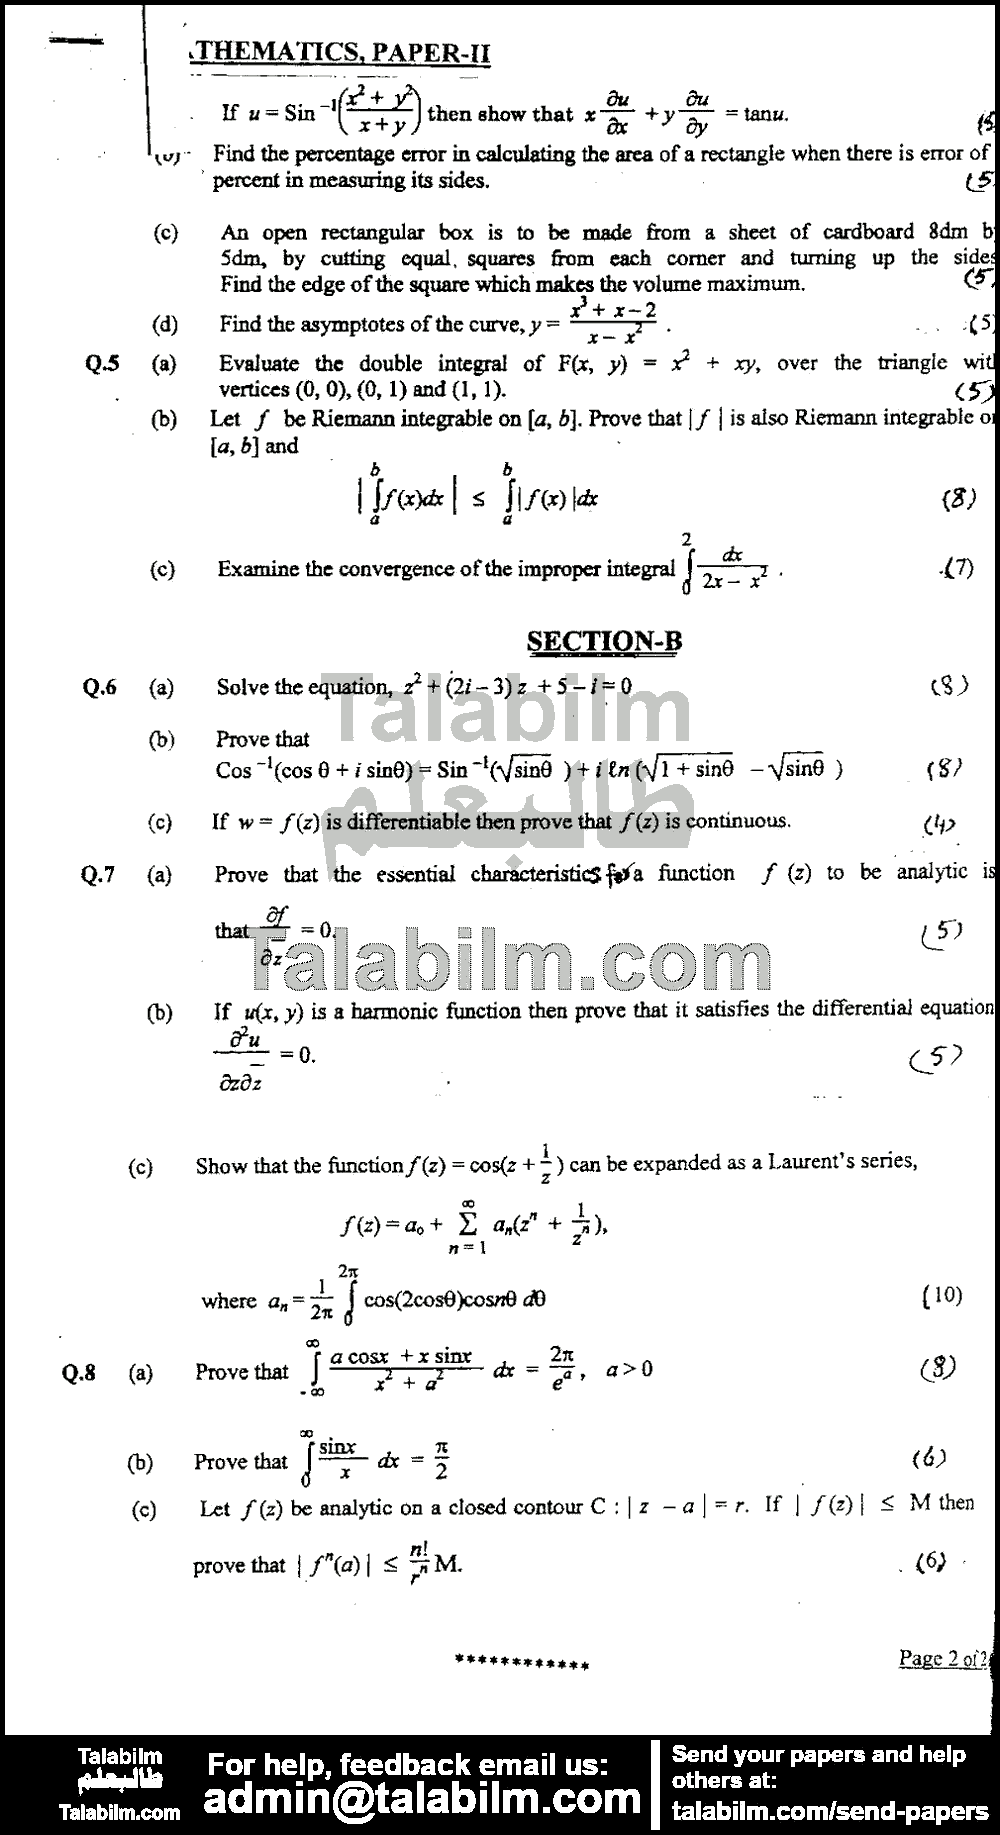 Pure Mathematics 0 past paper for 2013 Page No. 3